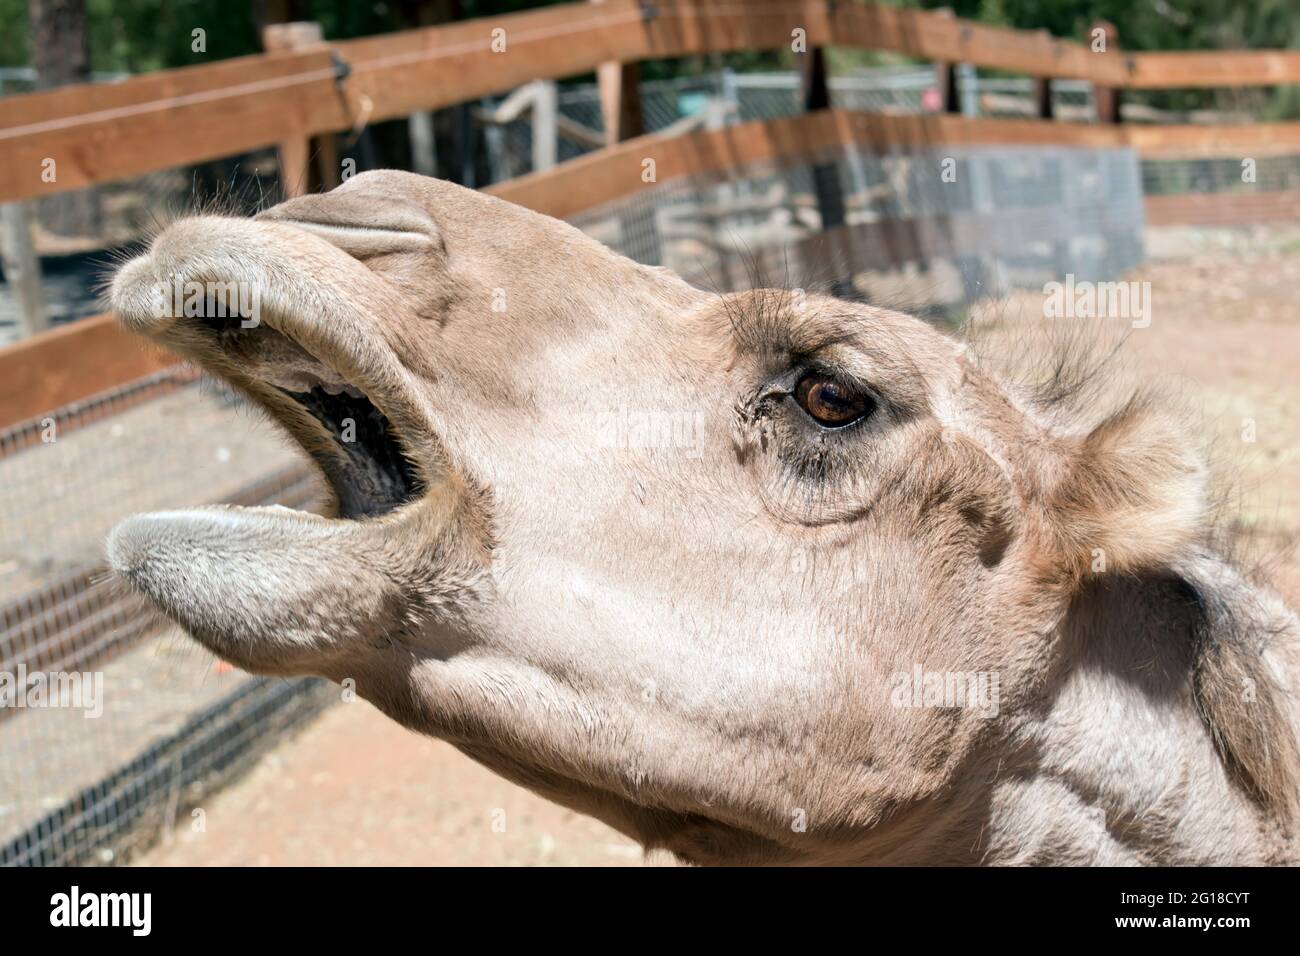 the camel has brown fur and brown eyes and one hump Stock Photo